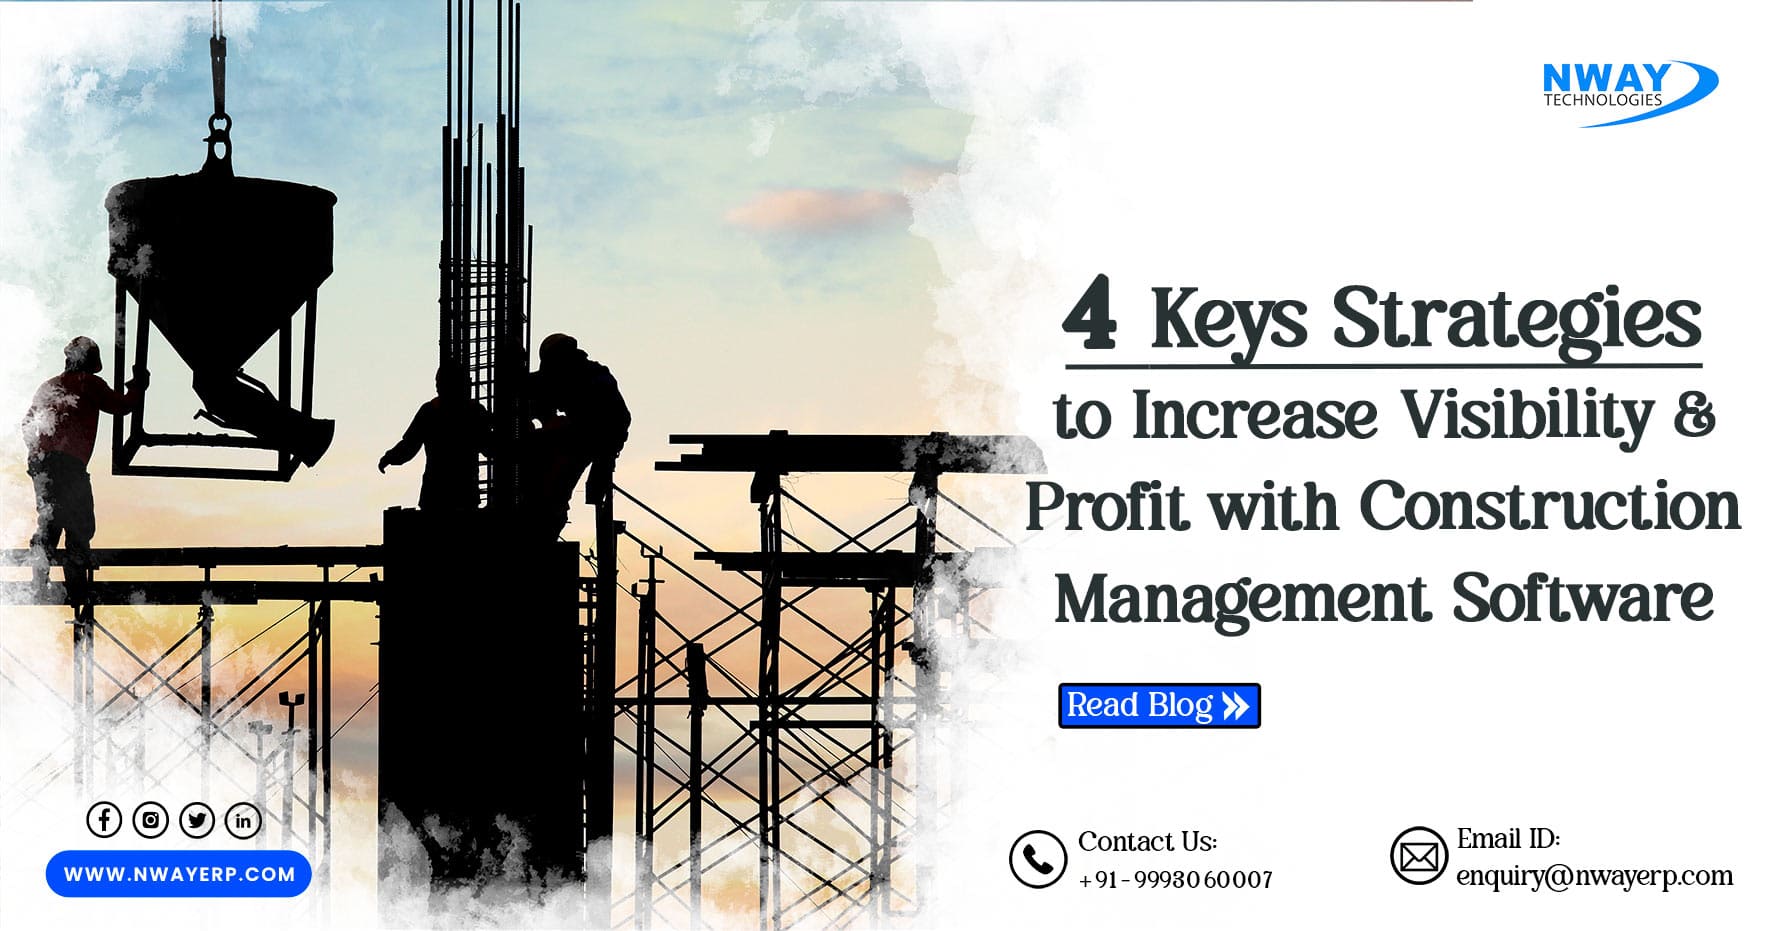 4 Keys Strategies to Increase Visibility & Profit with Construction Management ERP Software?